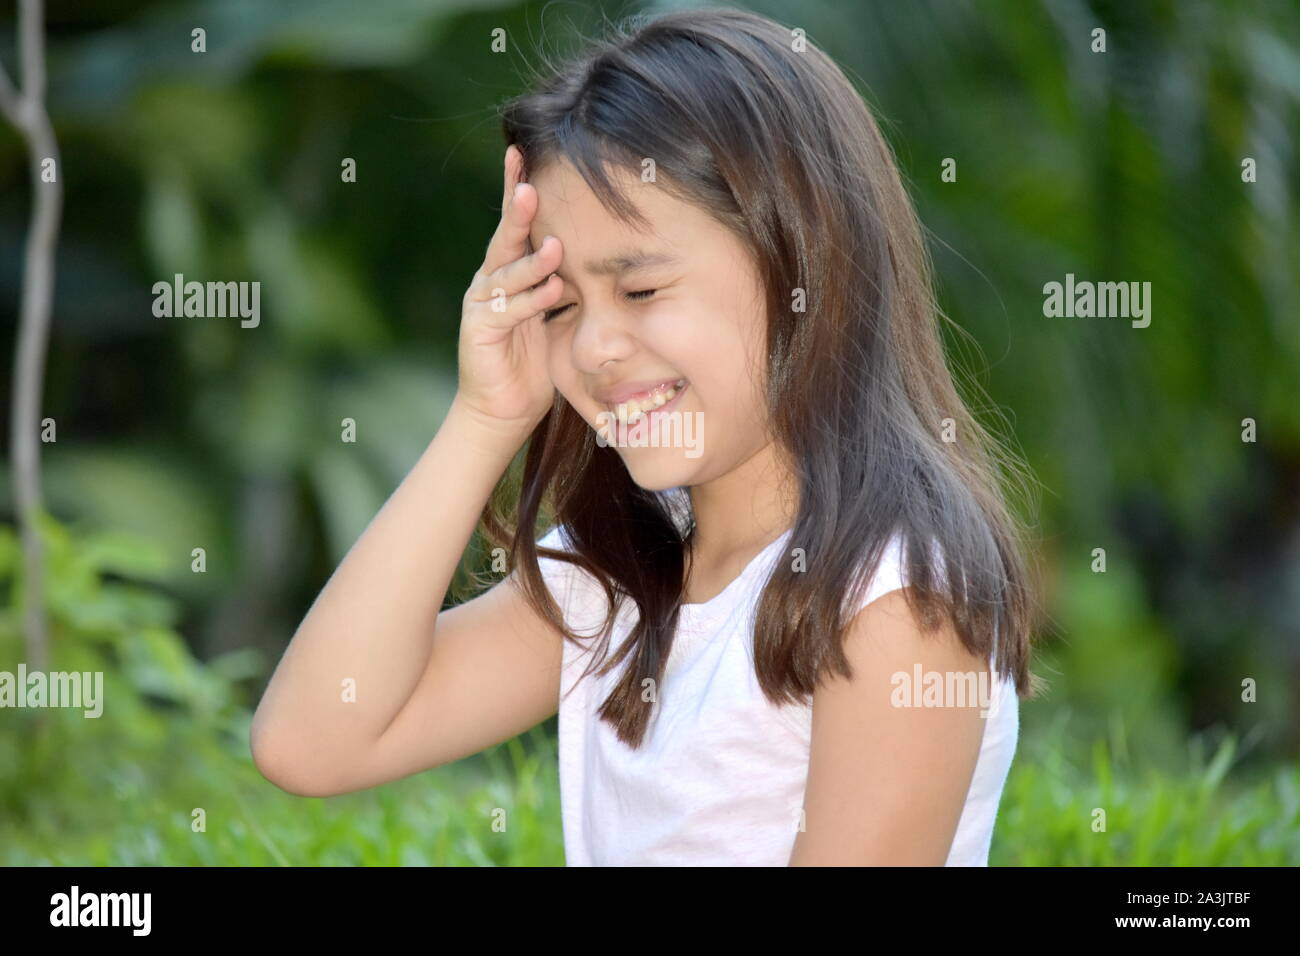 A Young Female And Laughter Stock Photo